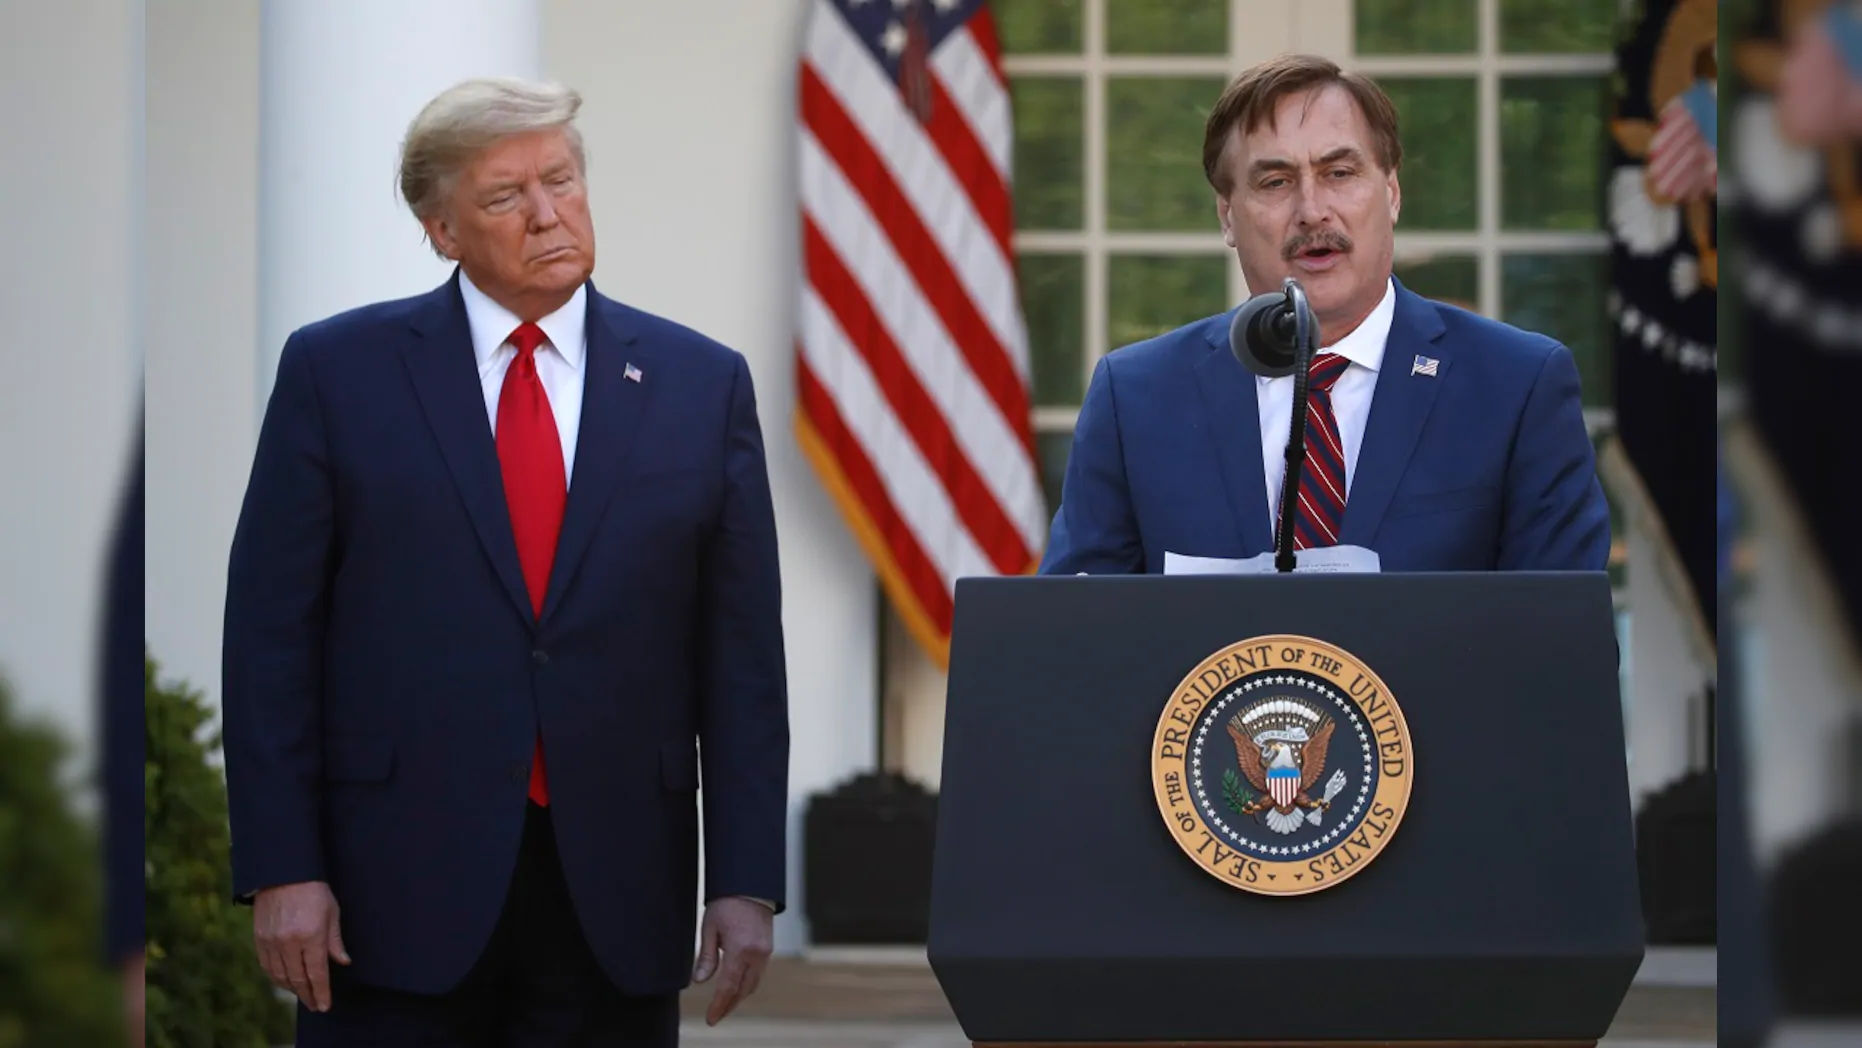 Trump ally Mike Lindell visits White House, carrying notes on invoking martial law